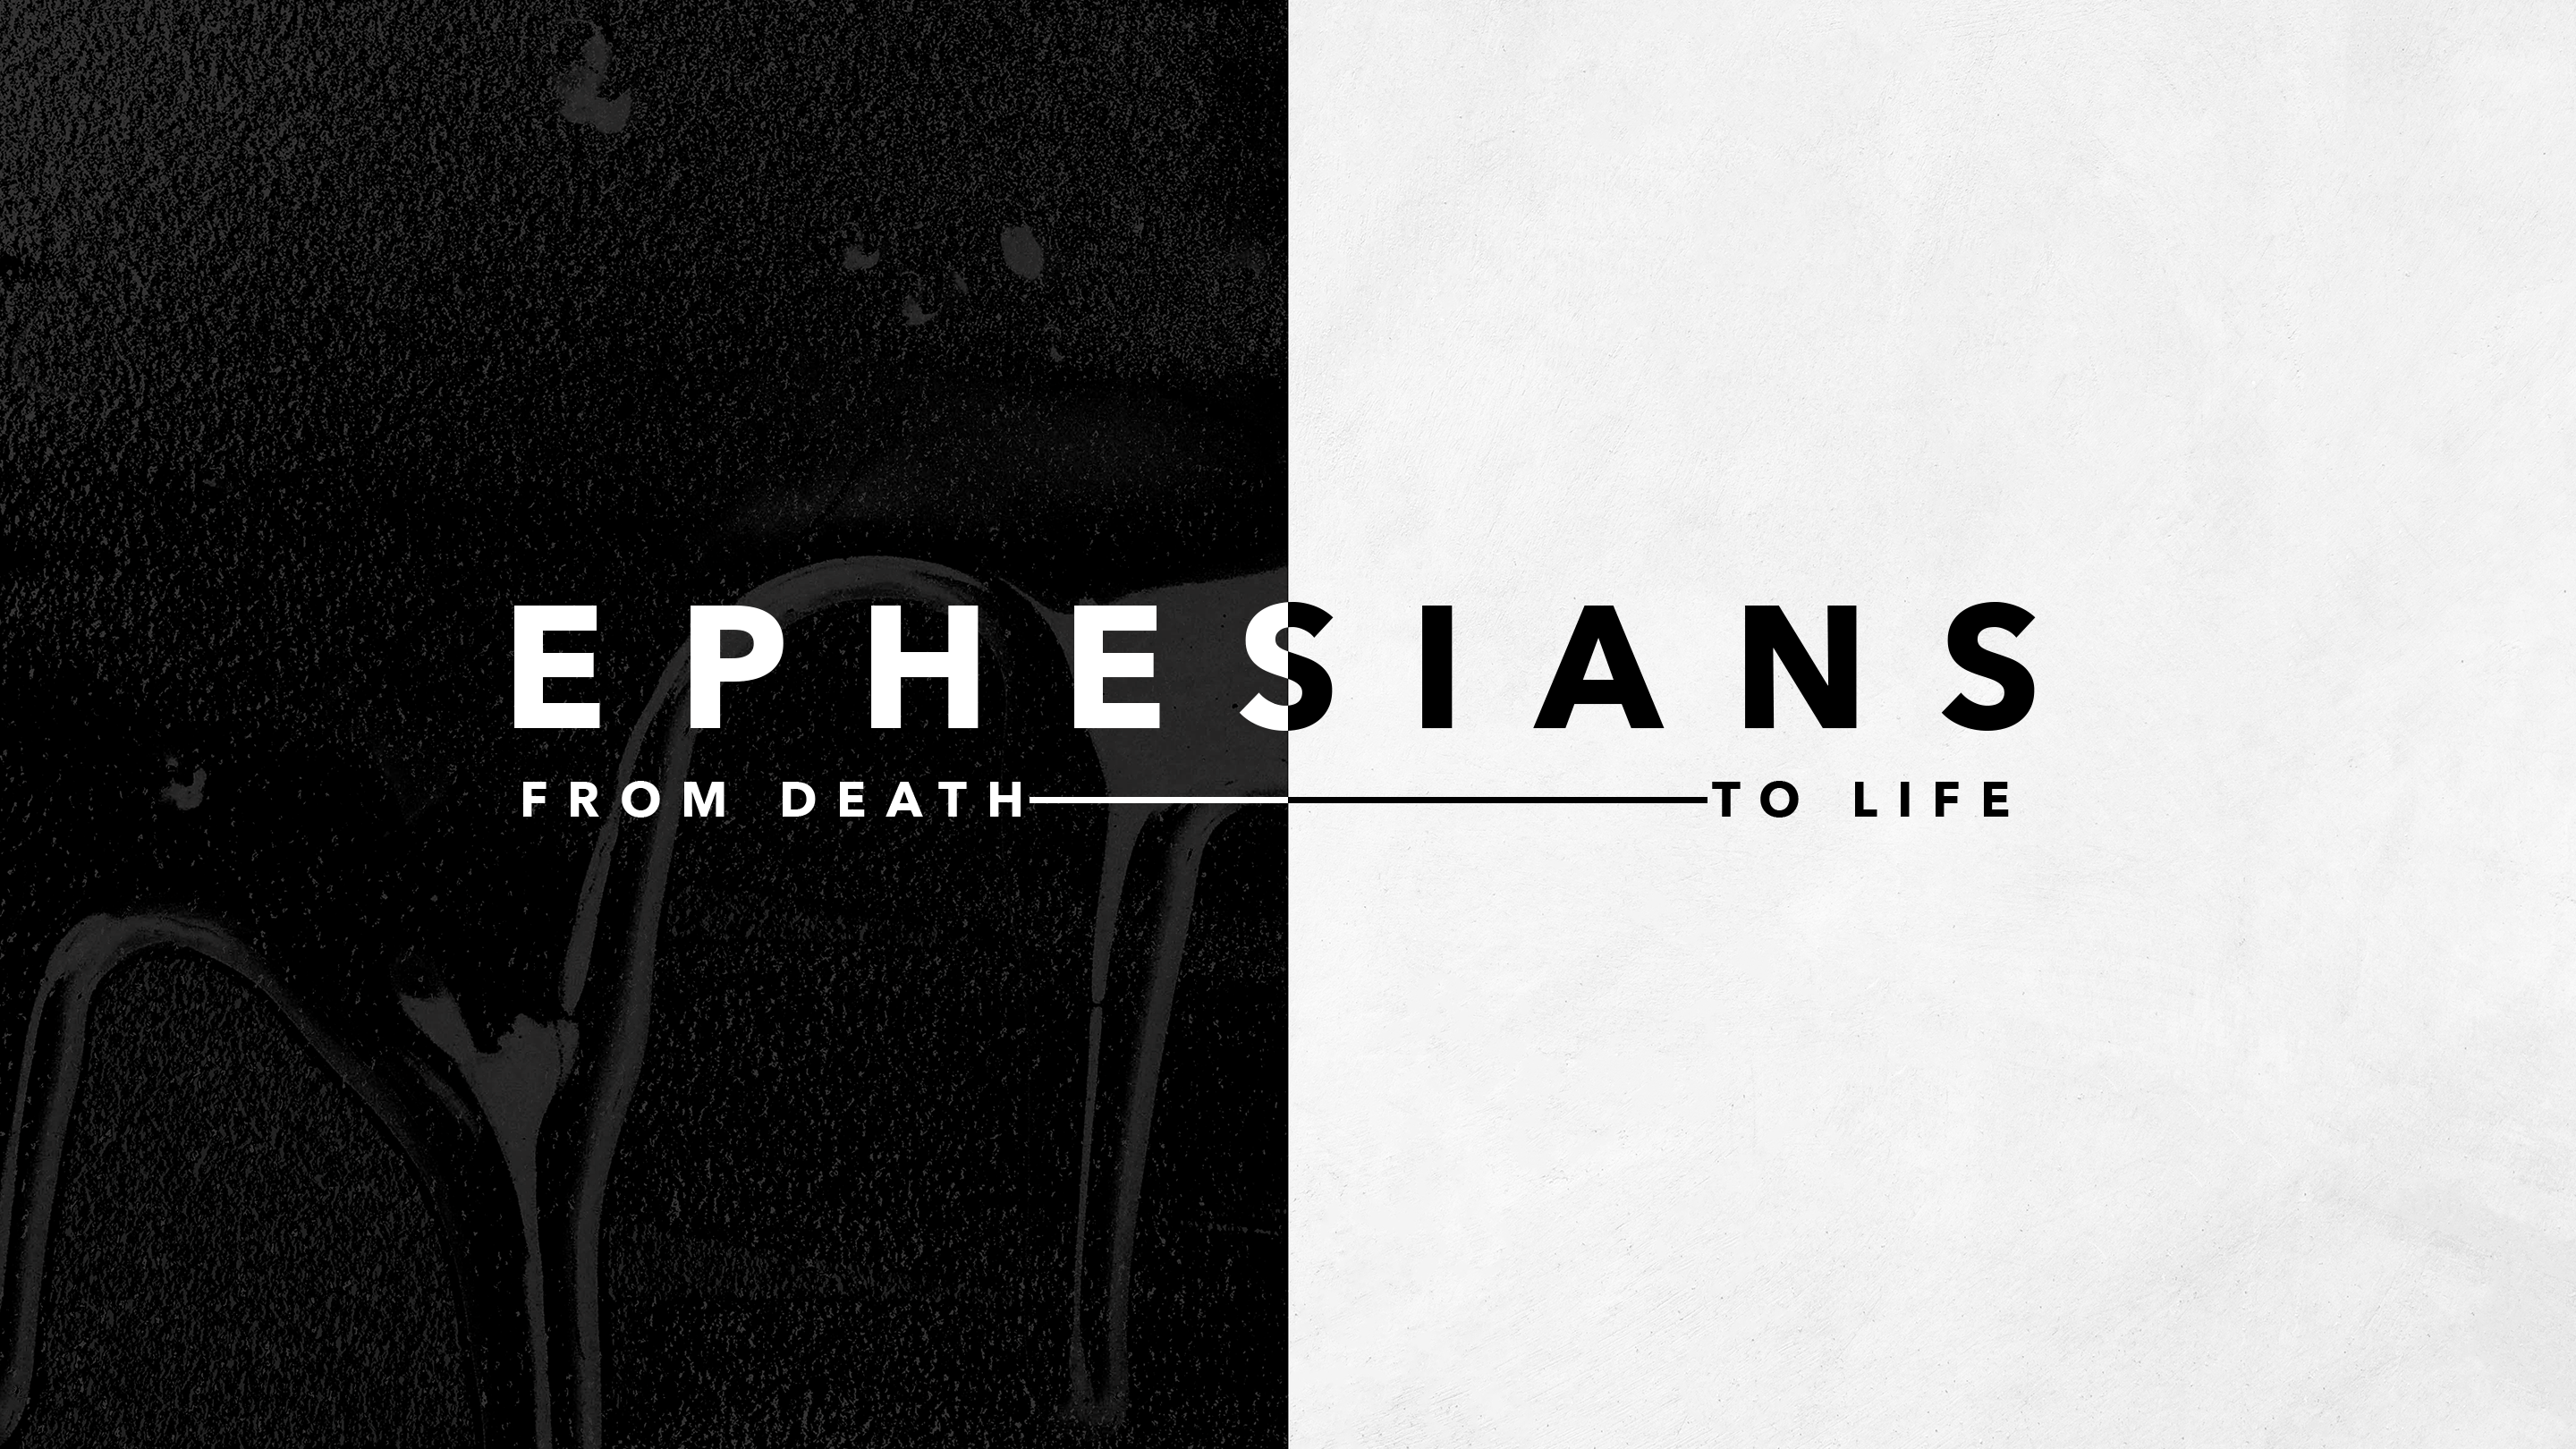 From Death to Life: Do My Prayers Even Matter?   (Ephesians 1:15-19)